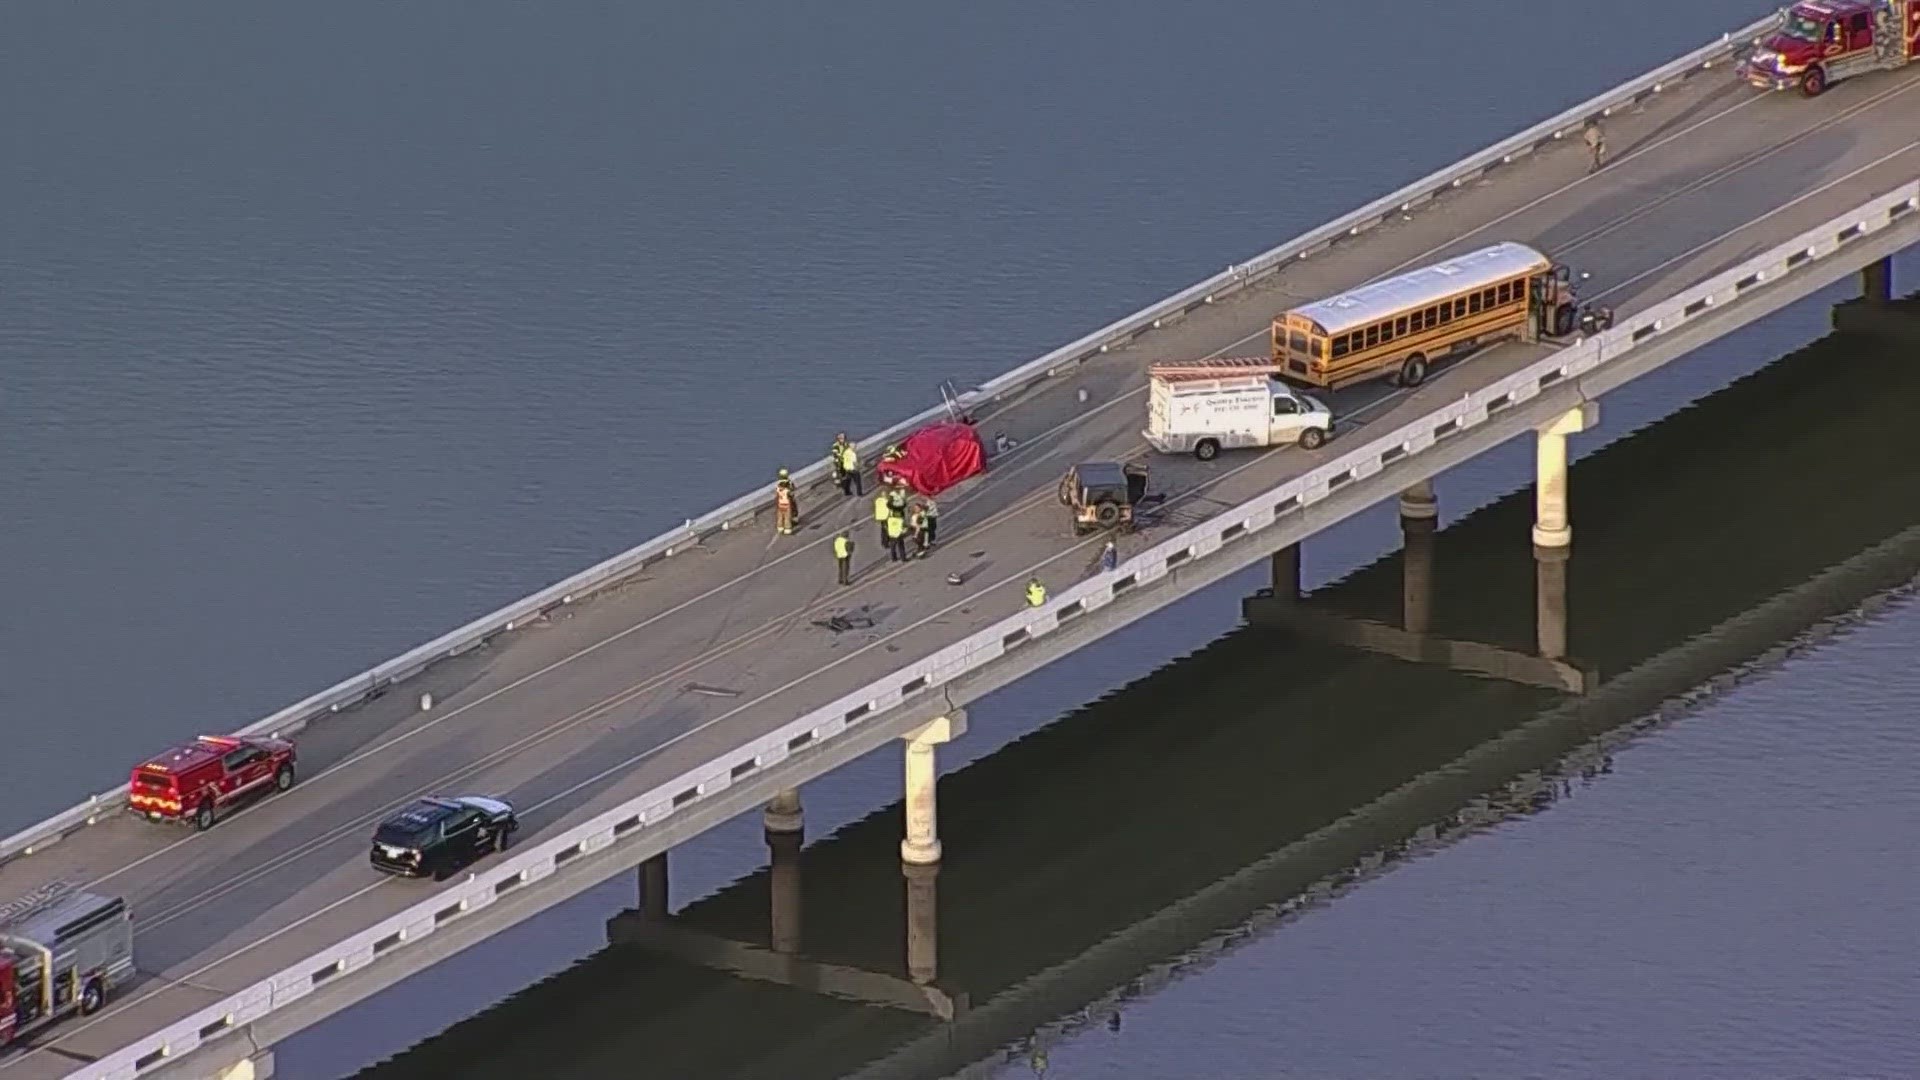 Officials said the accident happened Wednesday afternoon on the FM 3286 bridge over Lavon Lake.